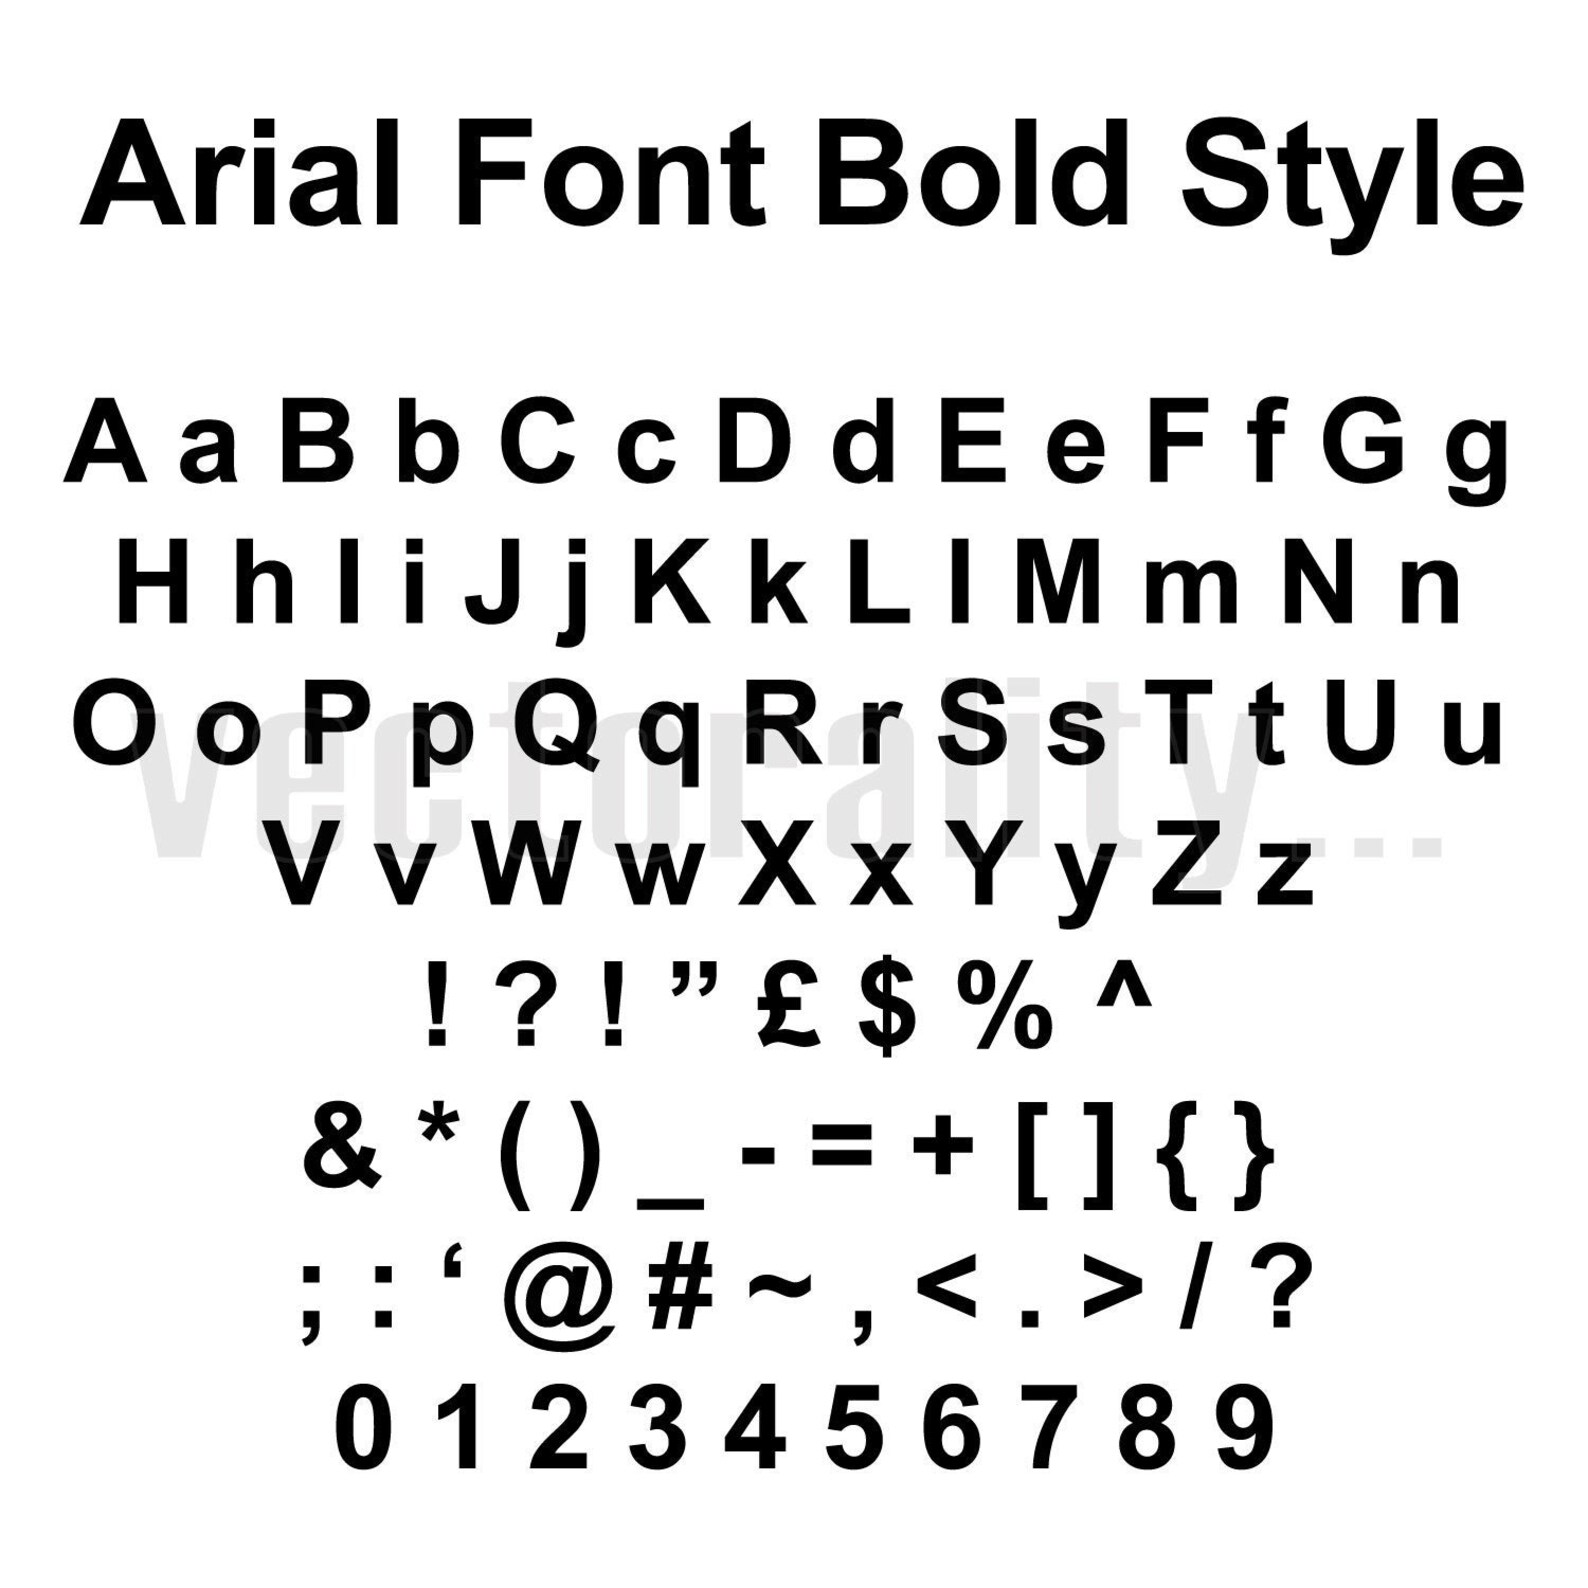 Шрифт arial 2. Arial шрифт. Шрифт arial Regular. Шрифт arial rounded. Полужирный шрифт arial.